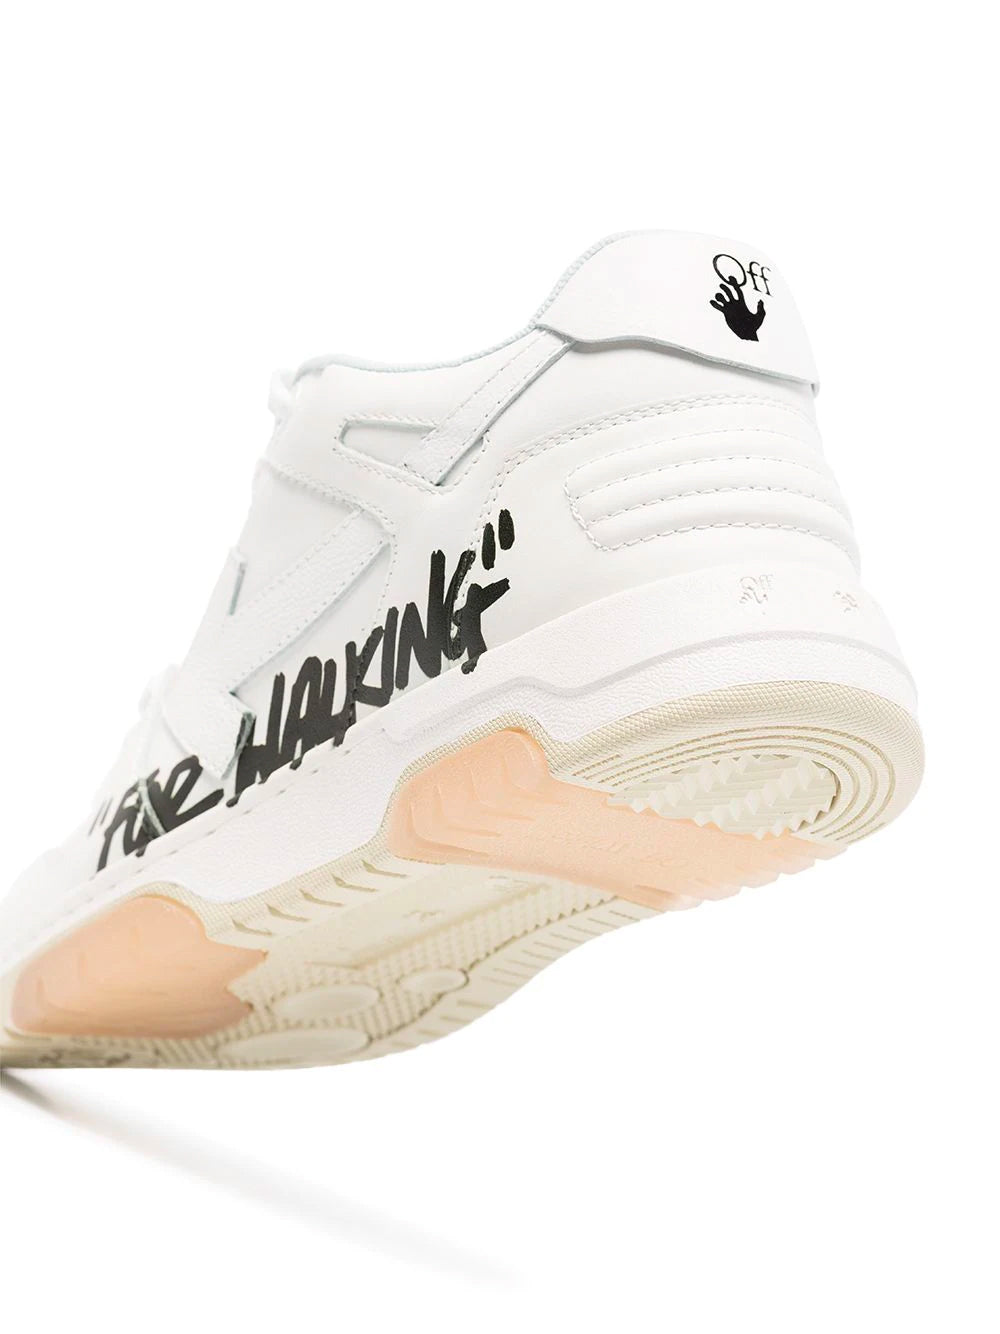 OFF-WHITE WOMEN Out Of Office "For Walking" Sneakers White/Black - MAISONDEFASHION.COM